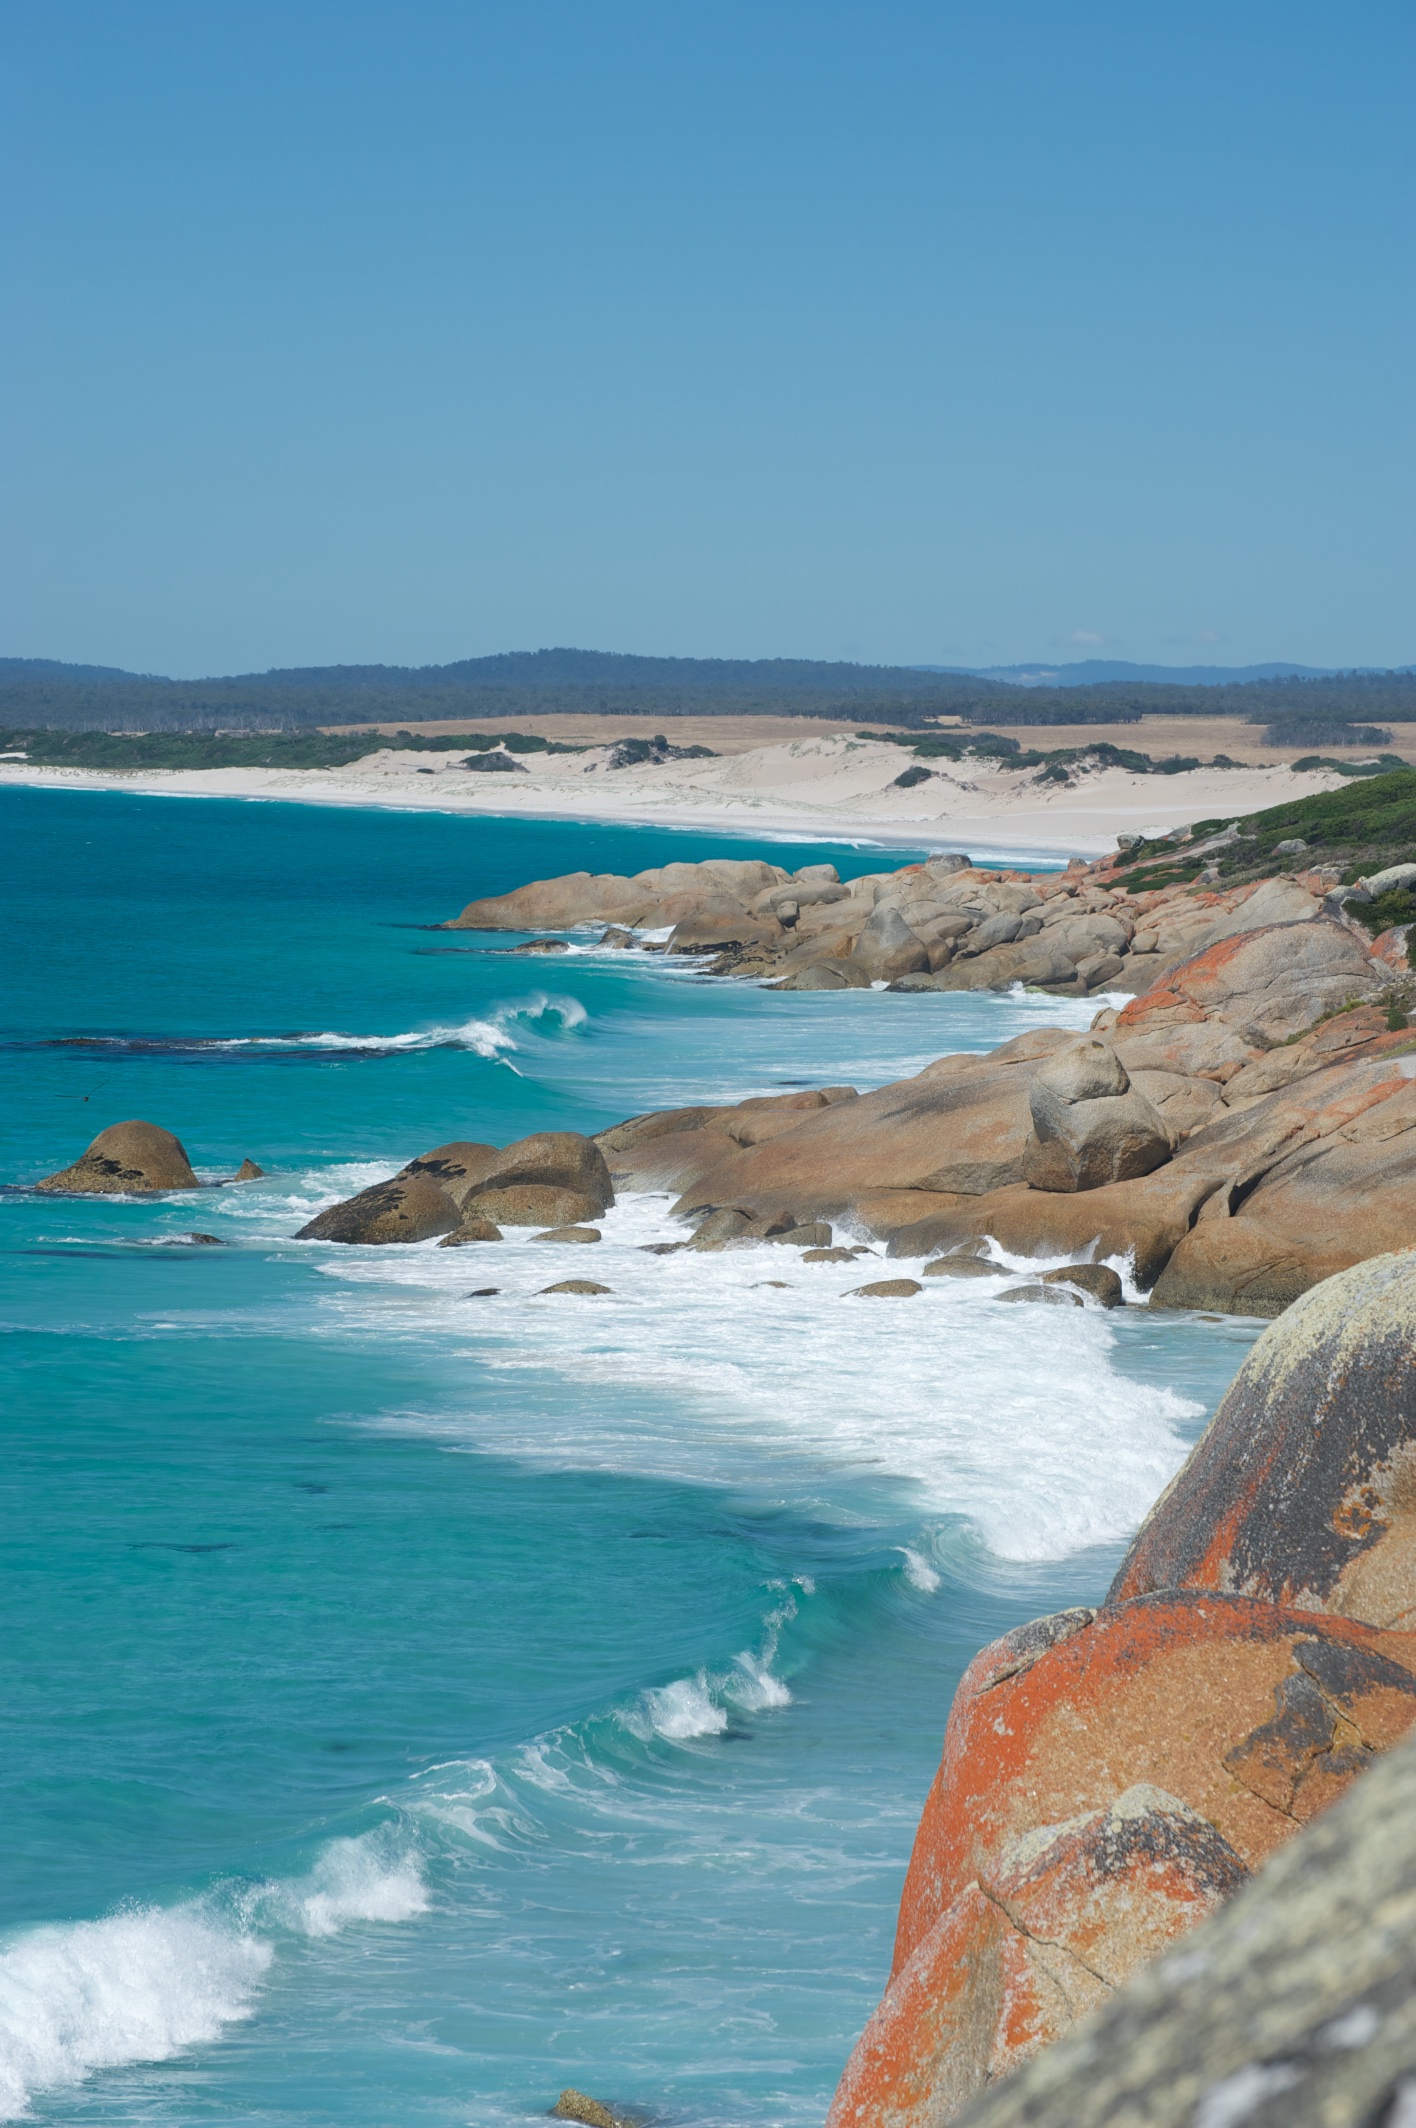 View towards Anson's Bay channel from Bayley Rocks, Bay of Fires